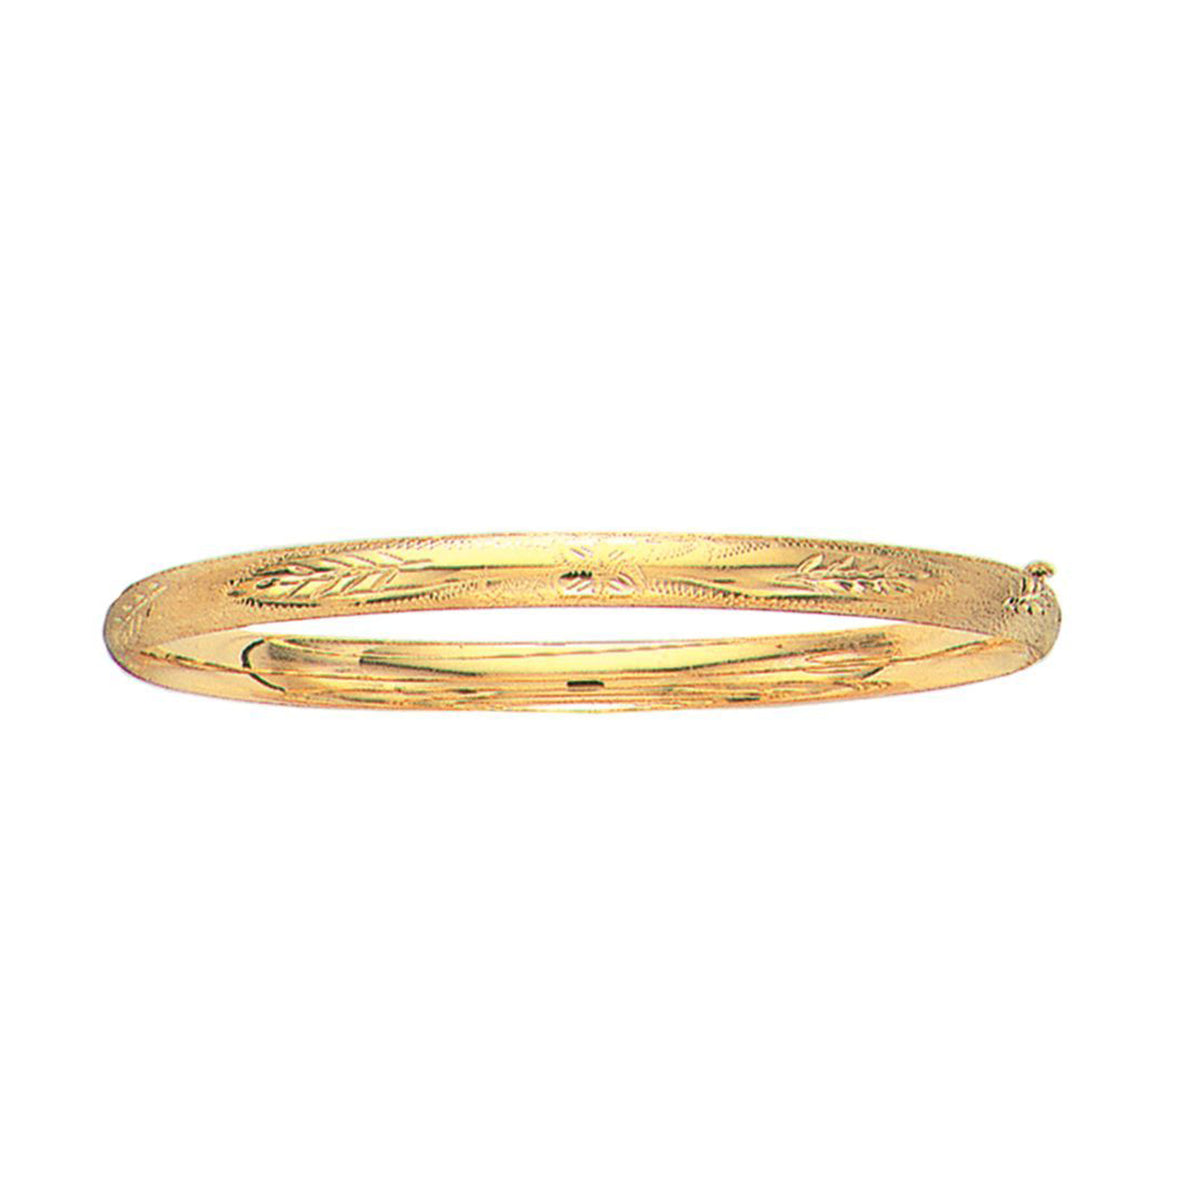 10k Yellow Gold High Polished Dome Florentine Bangle Bracelet, 7" fine designer jewelry for men and women